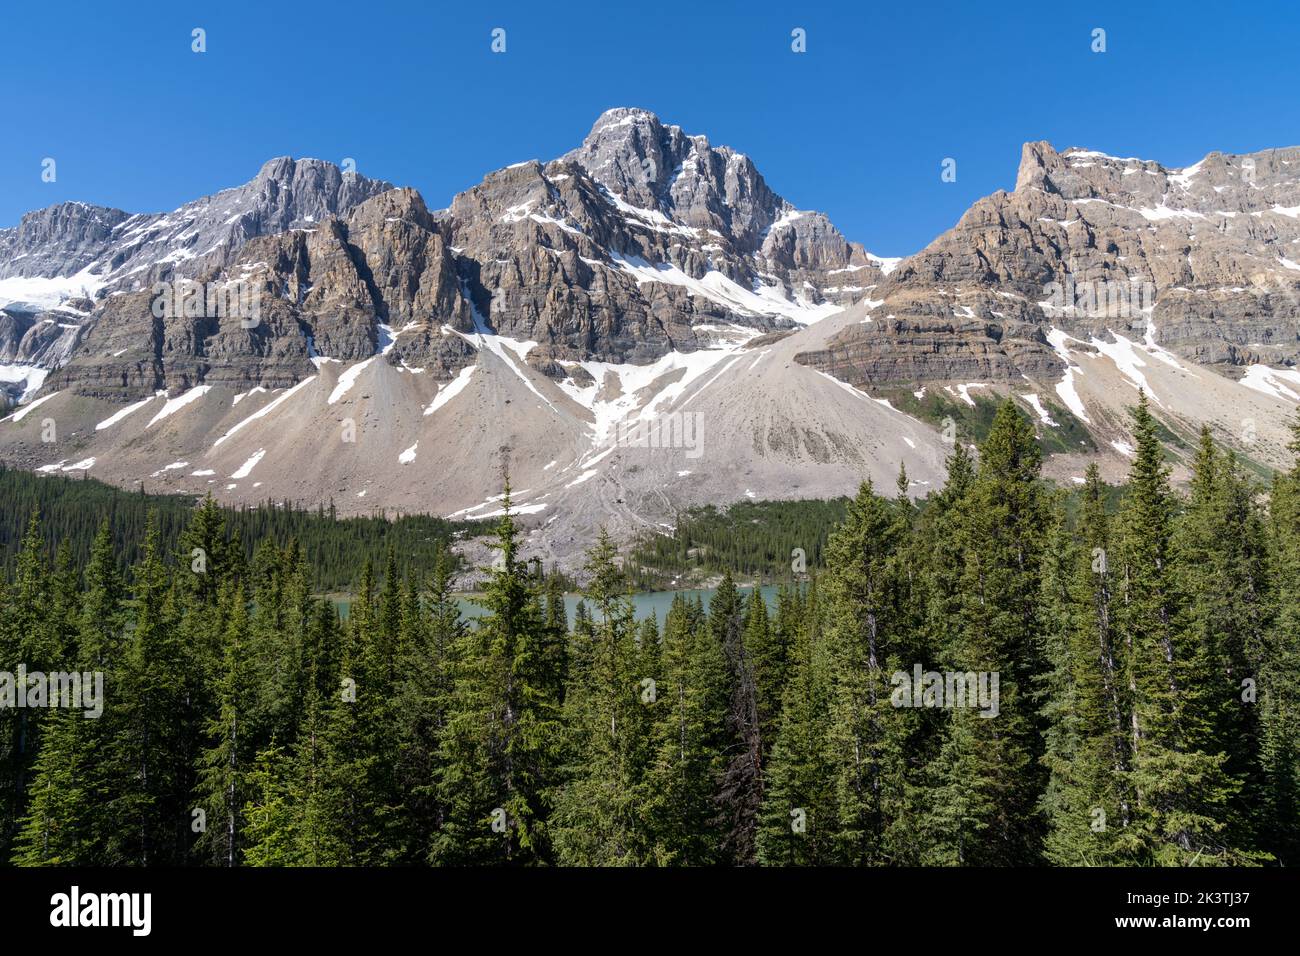 Mountain scenery near Bow Lake along the Icefields Parkway in Banff National Park Canada Stock Photo